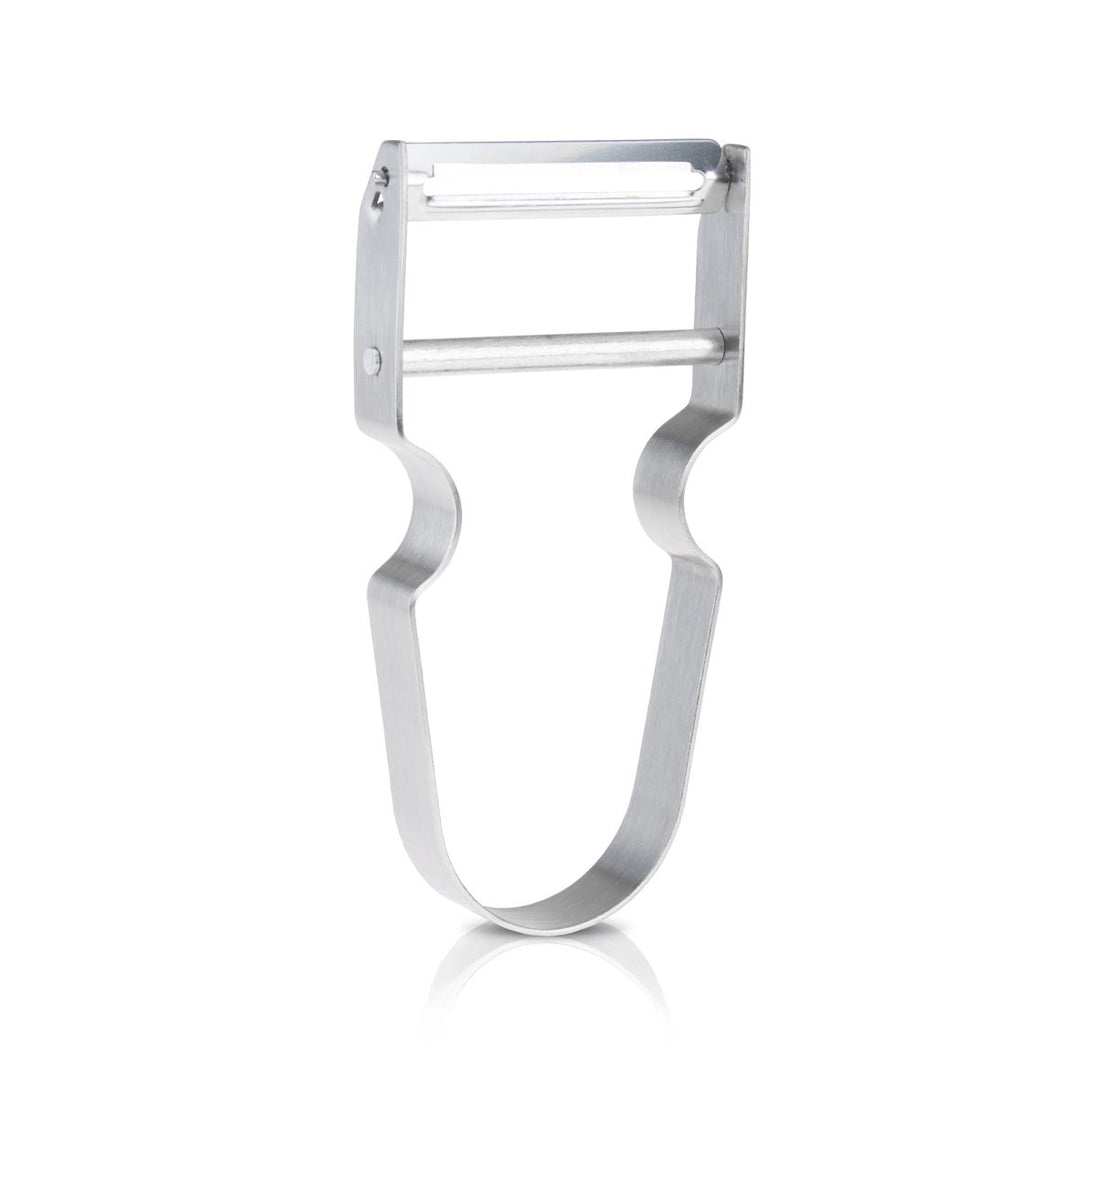 Stainless Steel Peeler - The Flower Crate